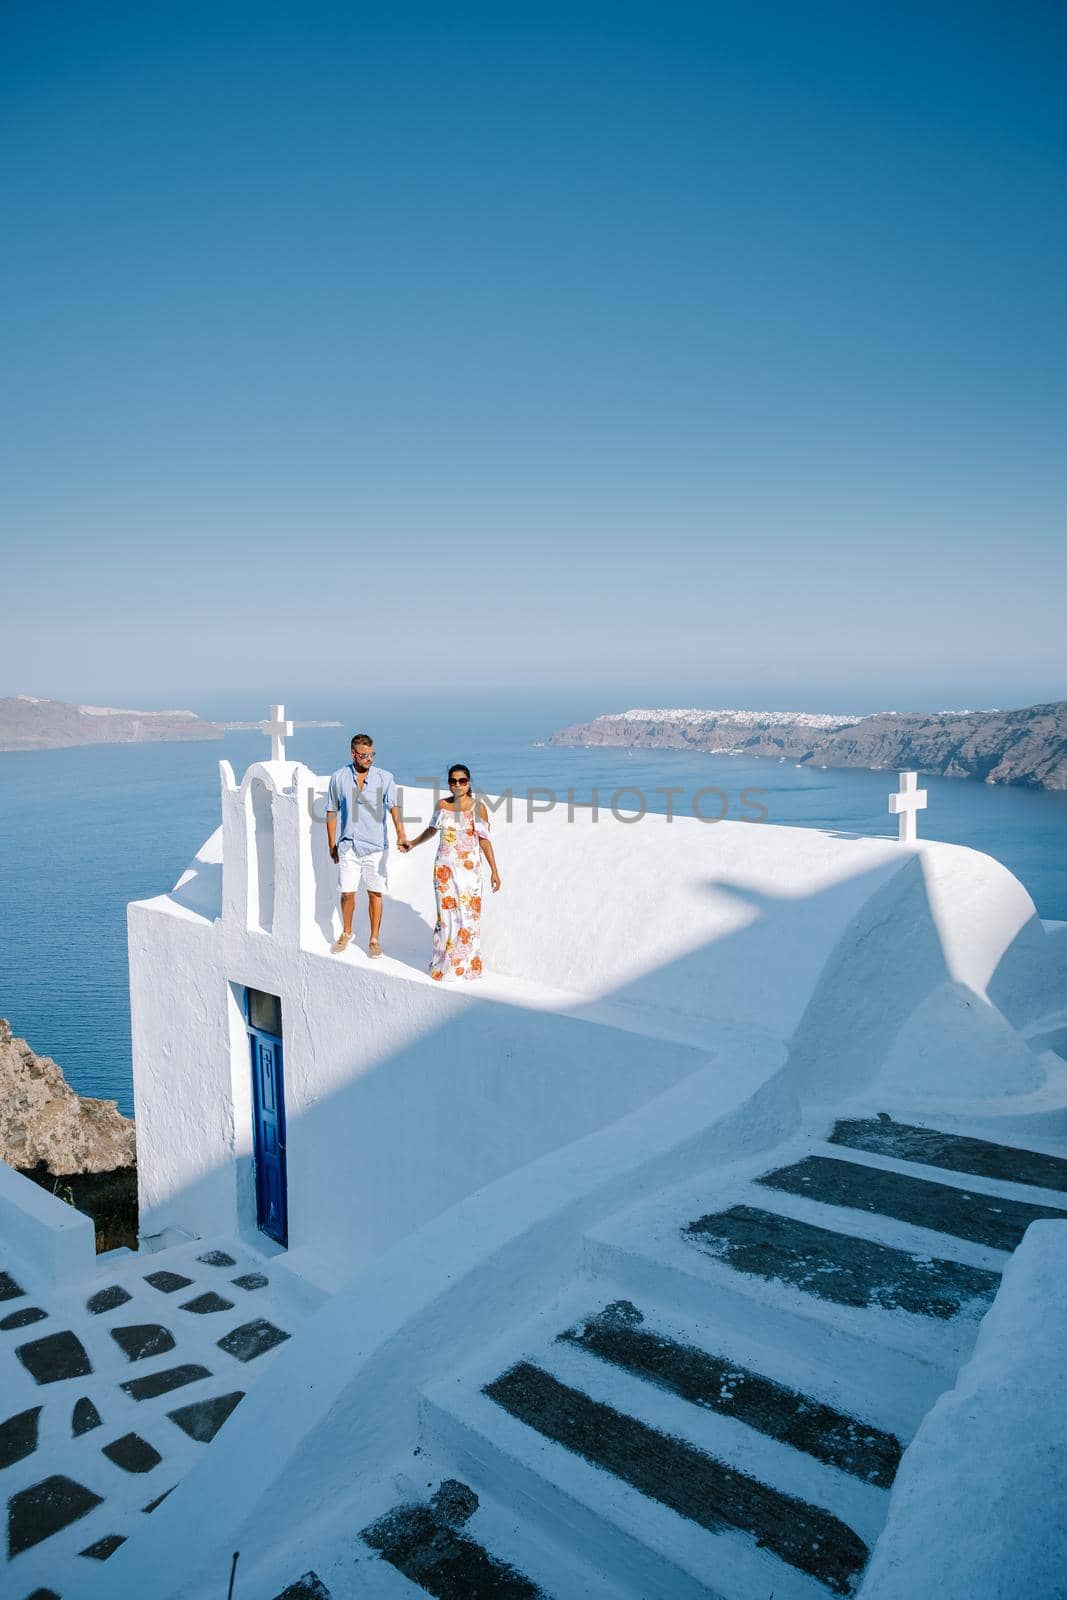 couple visit Skaros rock Fira, Santorini Greece, young couple on luxury vacation at the Island of Santorini watching sunrise by the blue dome church and whitewashed village of Oia Santorini Greece  by fokkebok